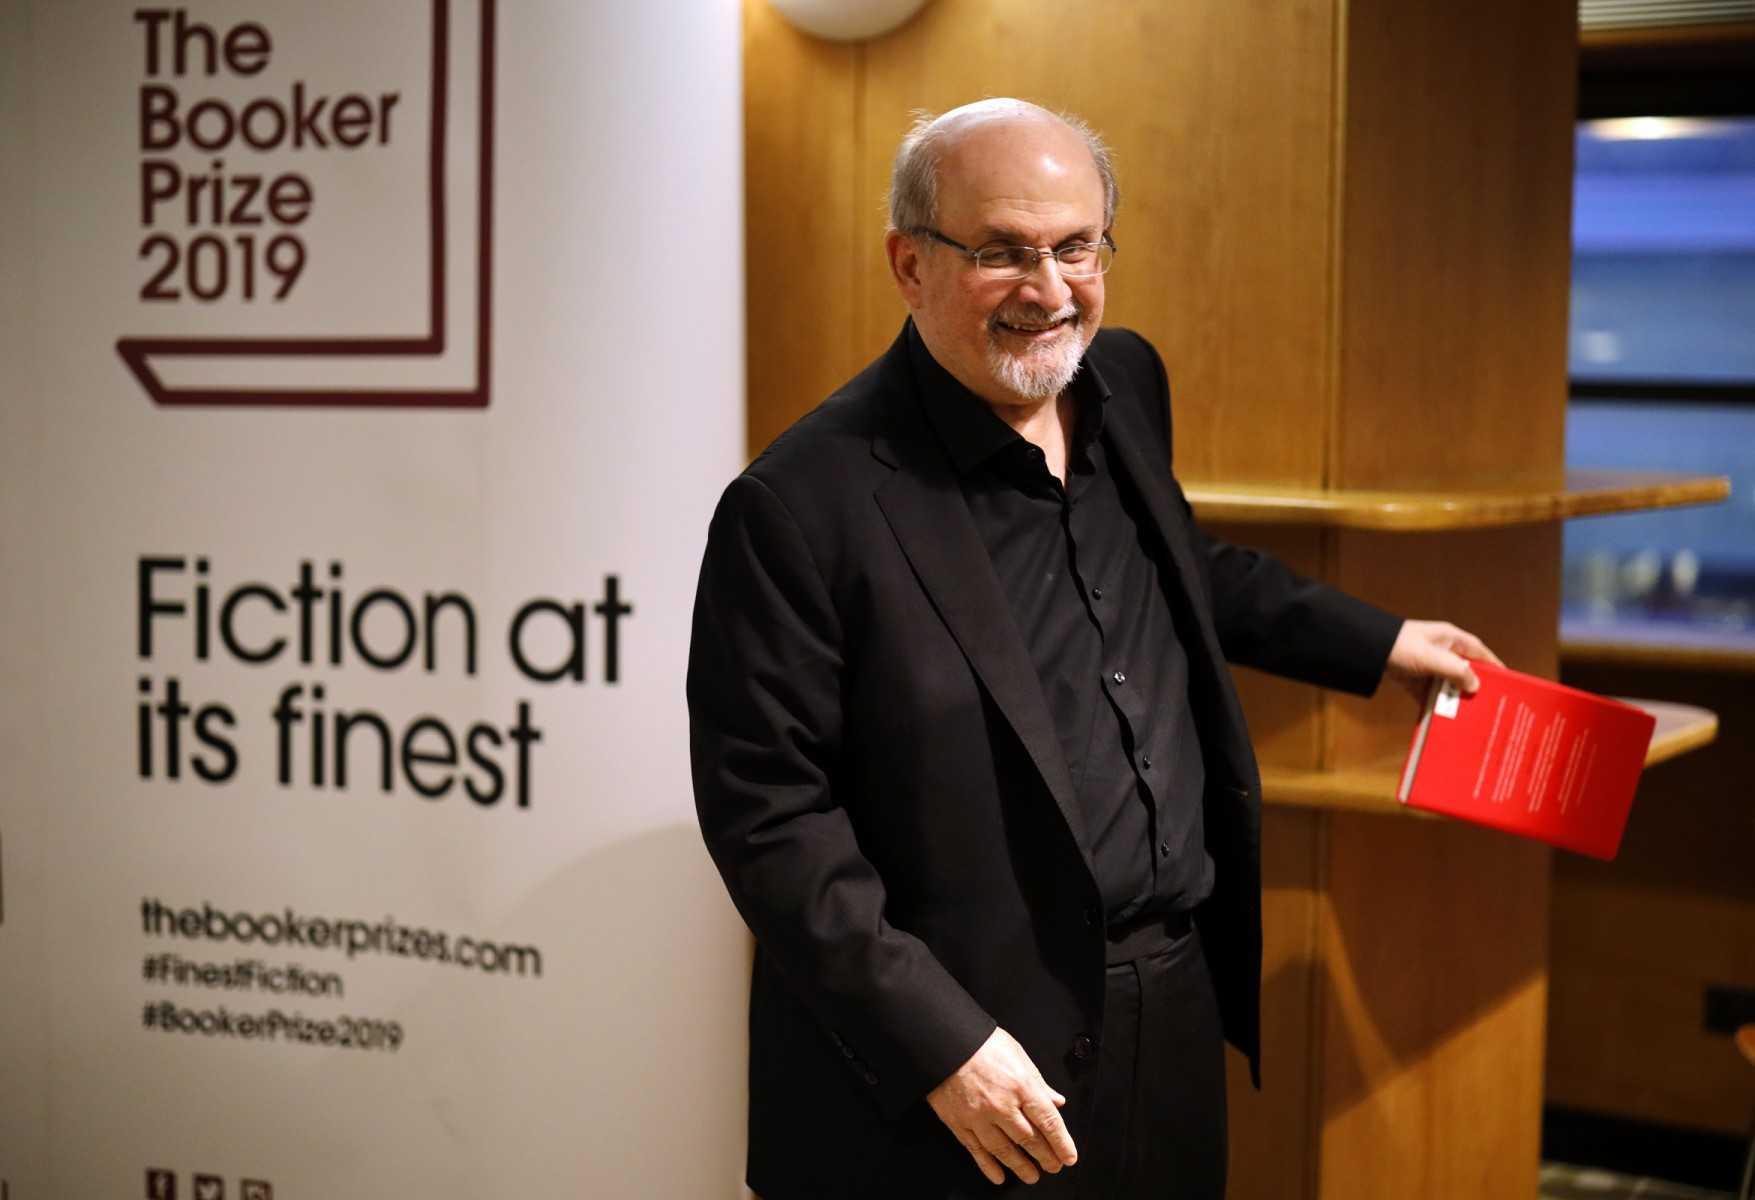 Author Salman Rushdie smiles as he attends a photocall with his book 'Quichotte' for the authors shortlisted for the 2019 Booker Prize for Fiction at Southbank Centre in London on Oct 13, 2019. Photo: AFP